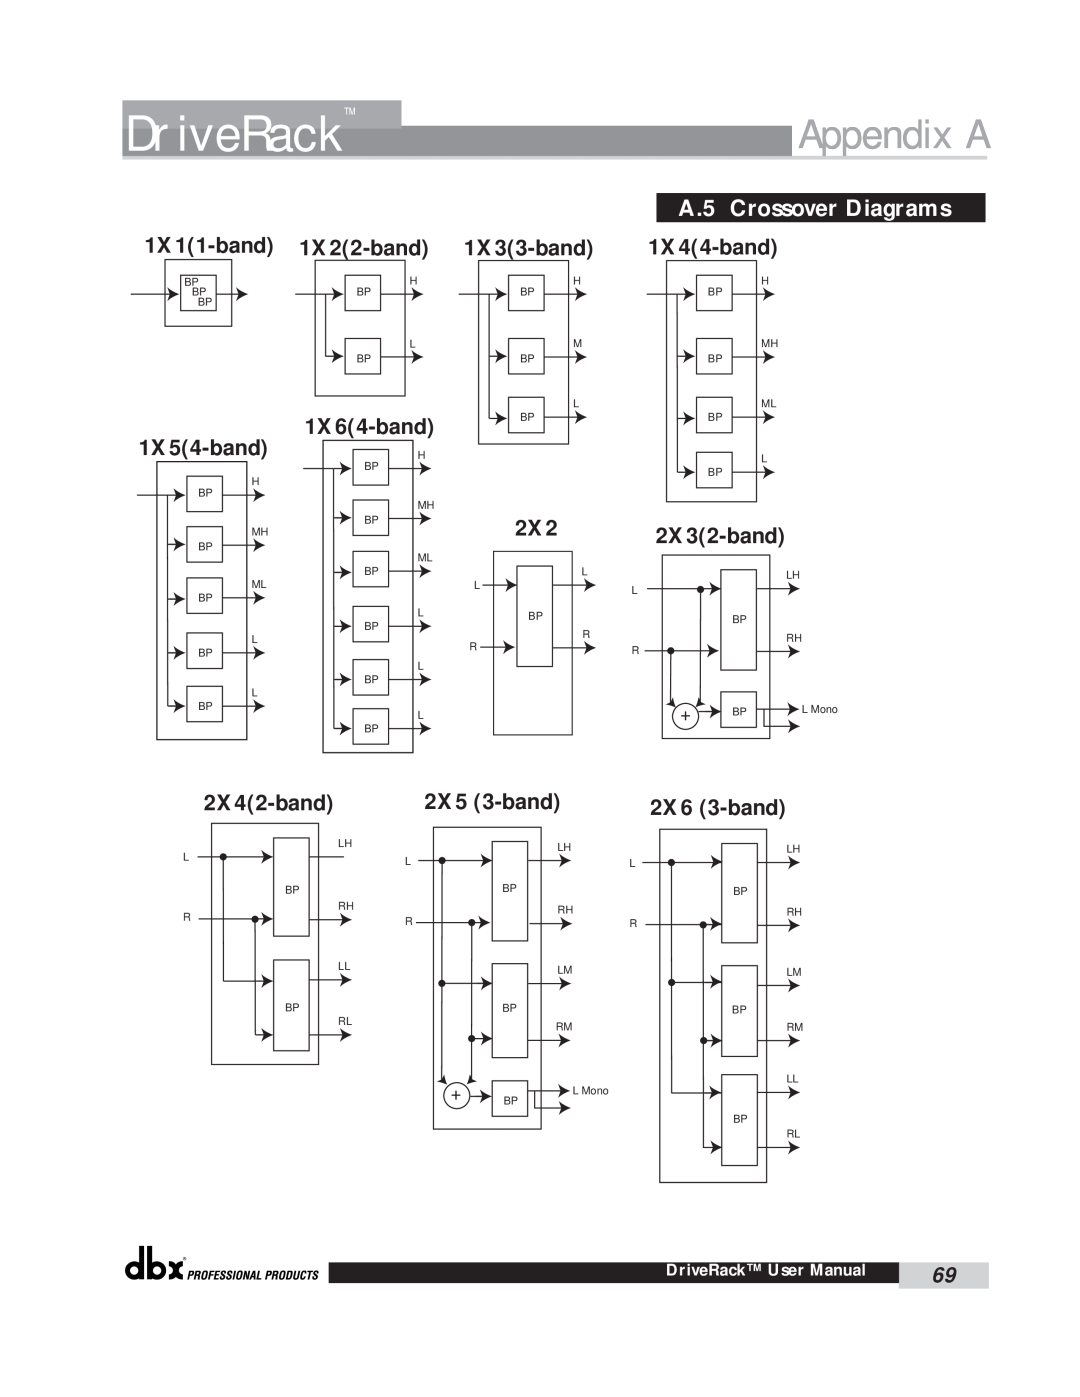 dbx Pro 260 A.5 Crossover Diagrams, 1X11-band, 1X22-band, 1X33-band, 1X44-band, 1X64-band, 1X54-band, 2X32-band, 2X42-band 